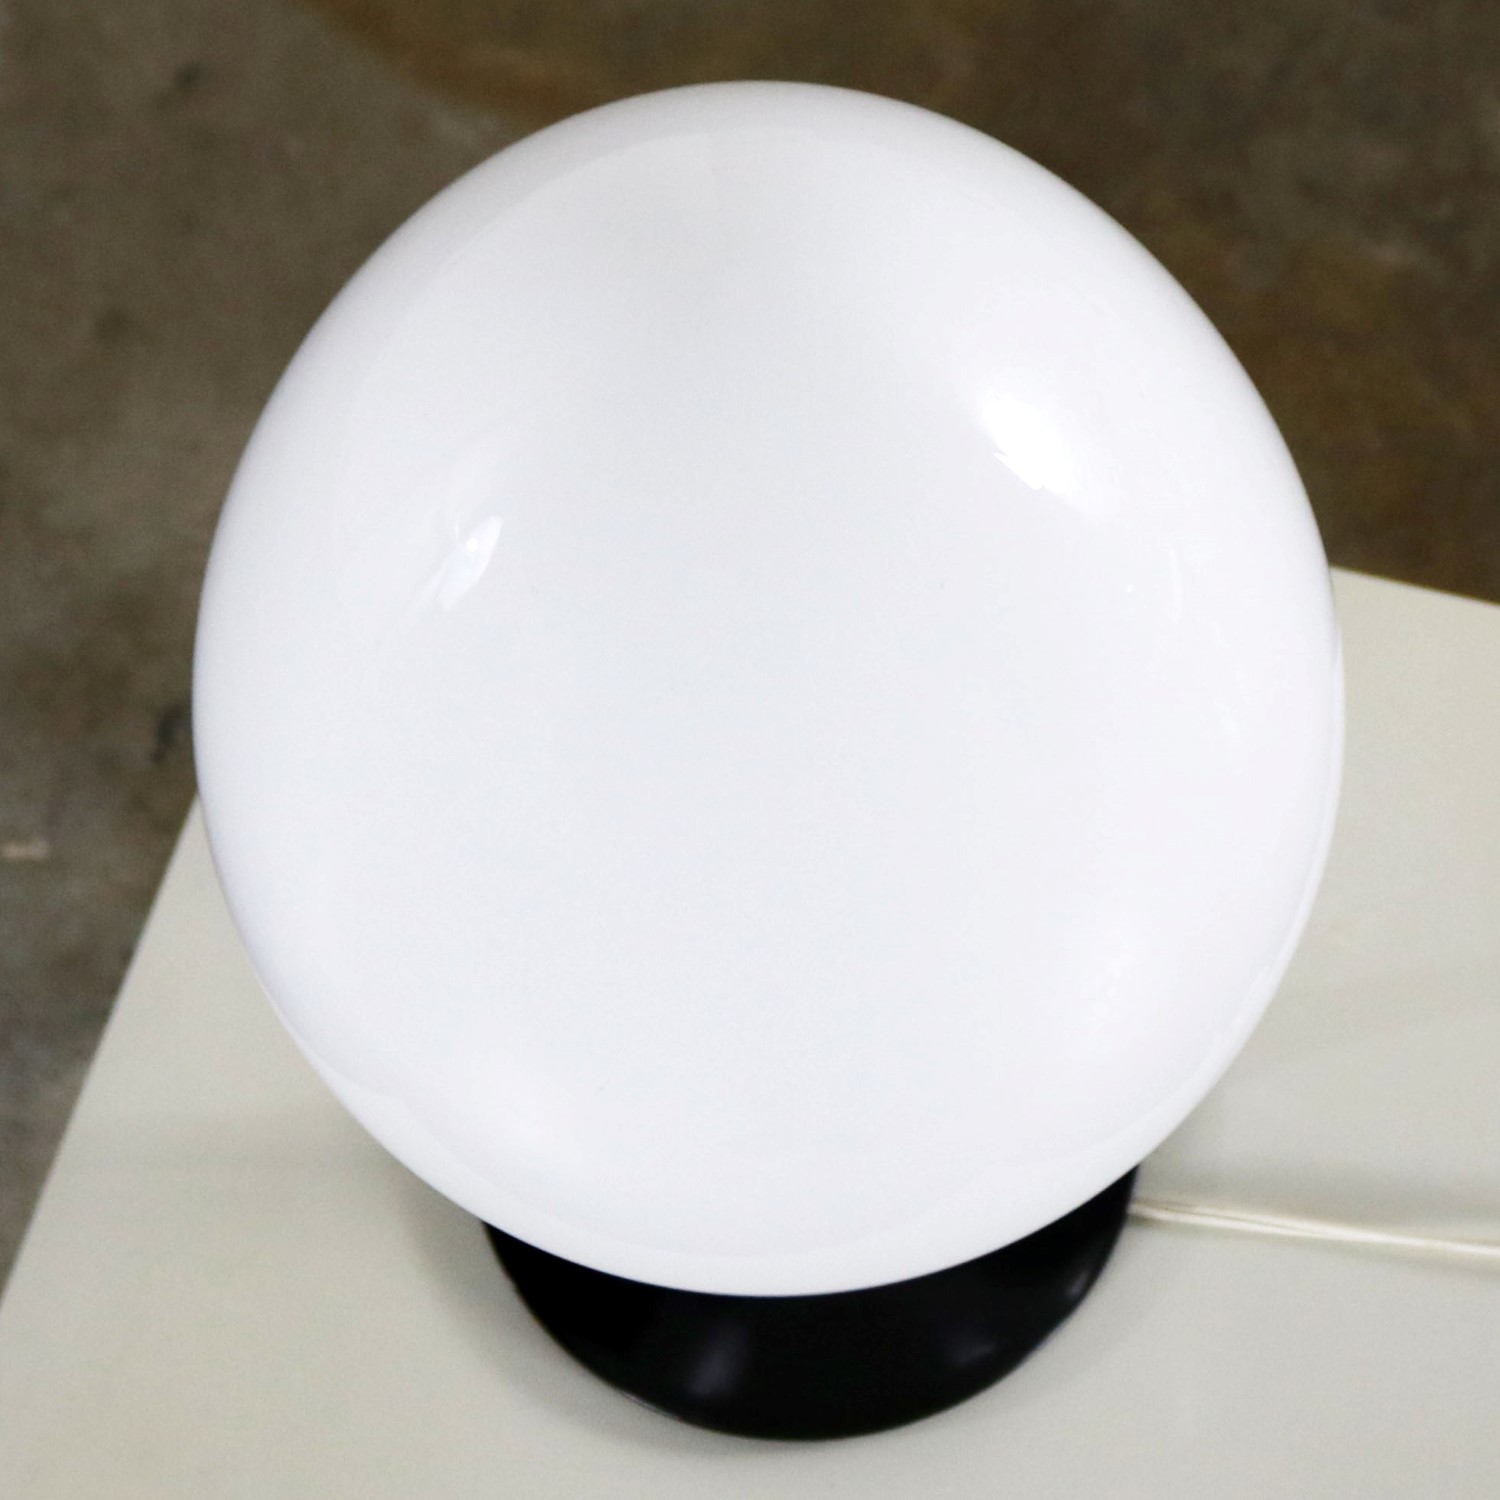 Bill Curry Stemlite Tulip Base Table Lamp for Design Line with Egg Shaped White Globe